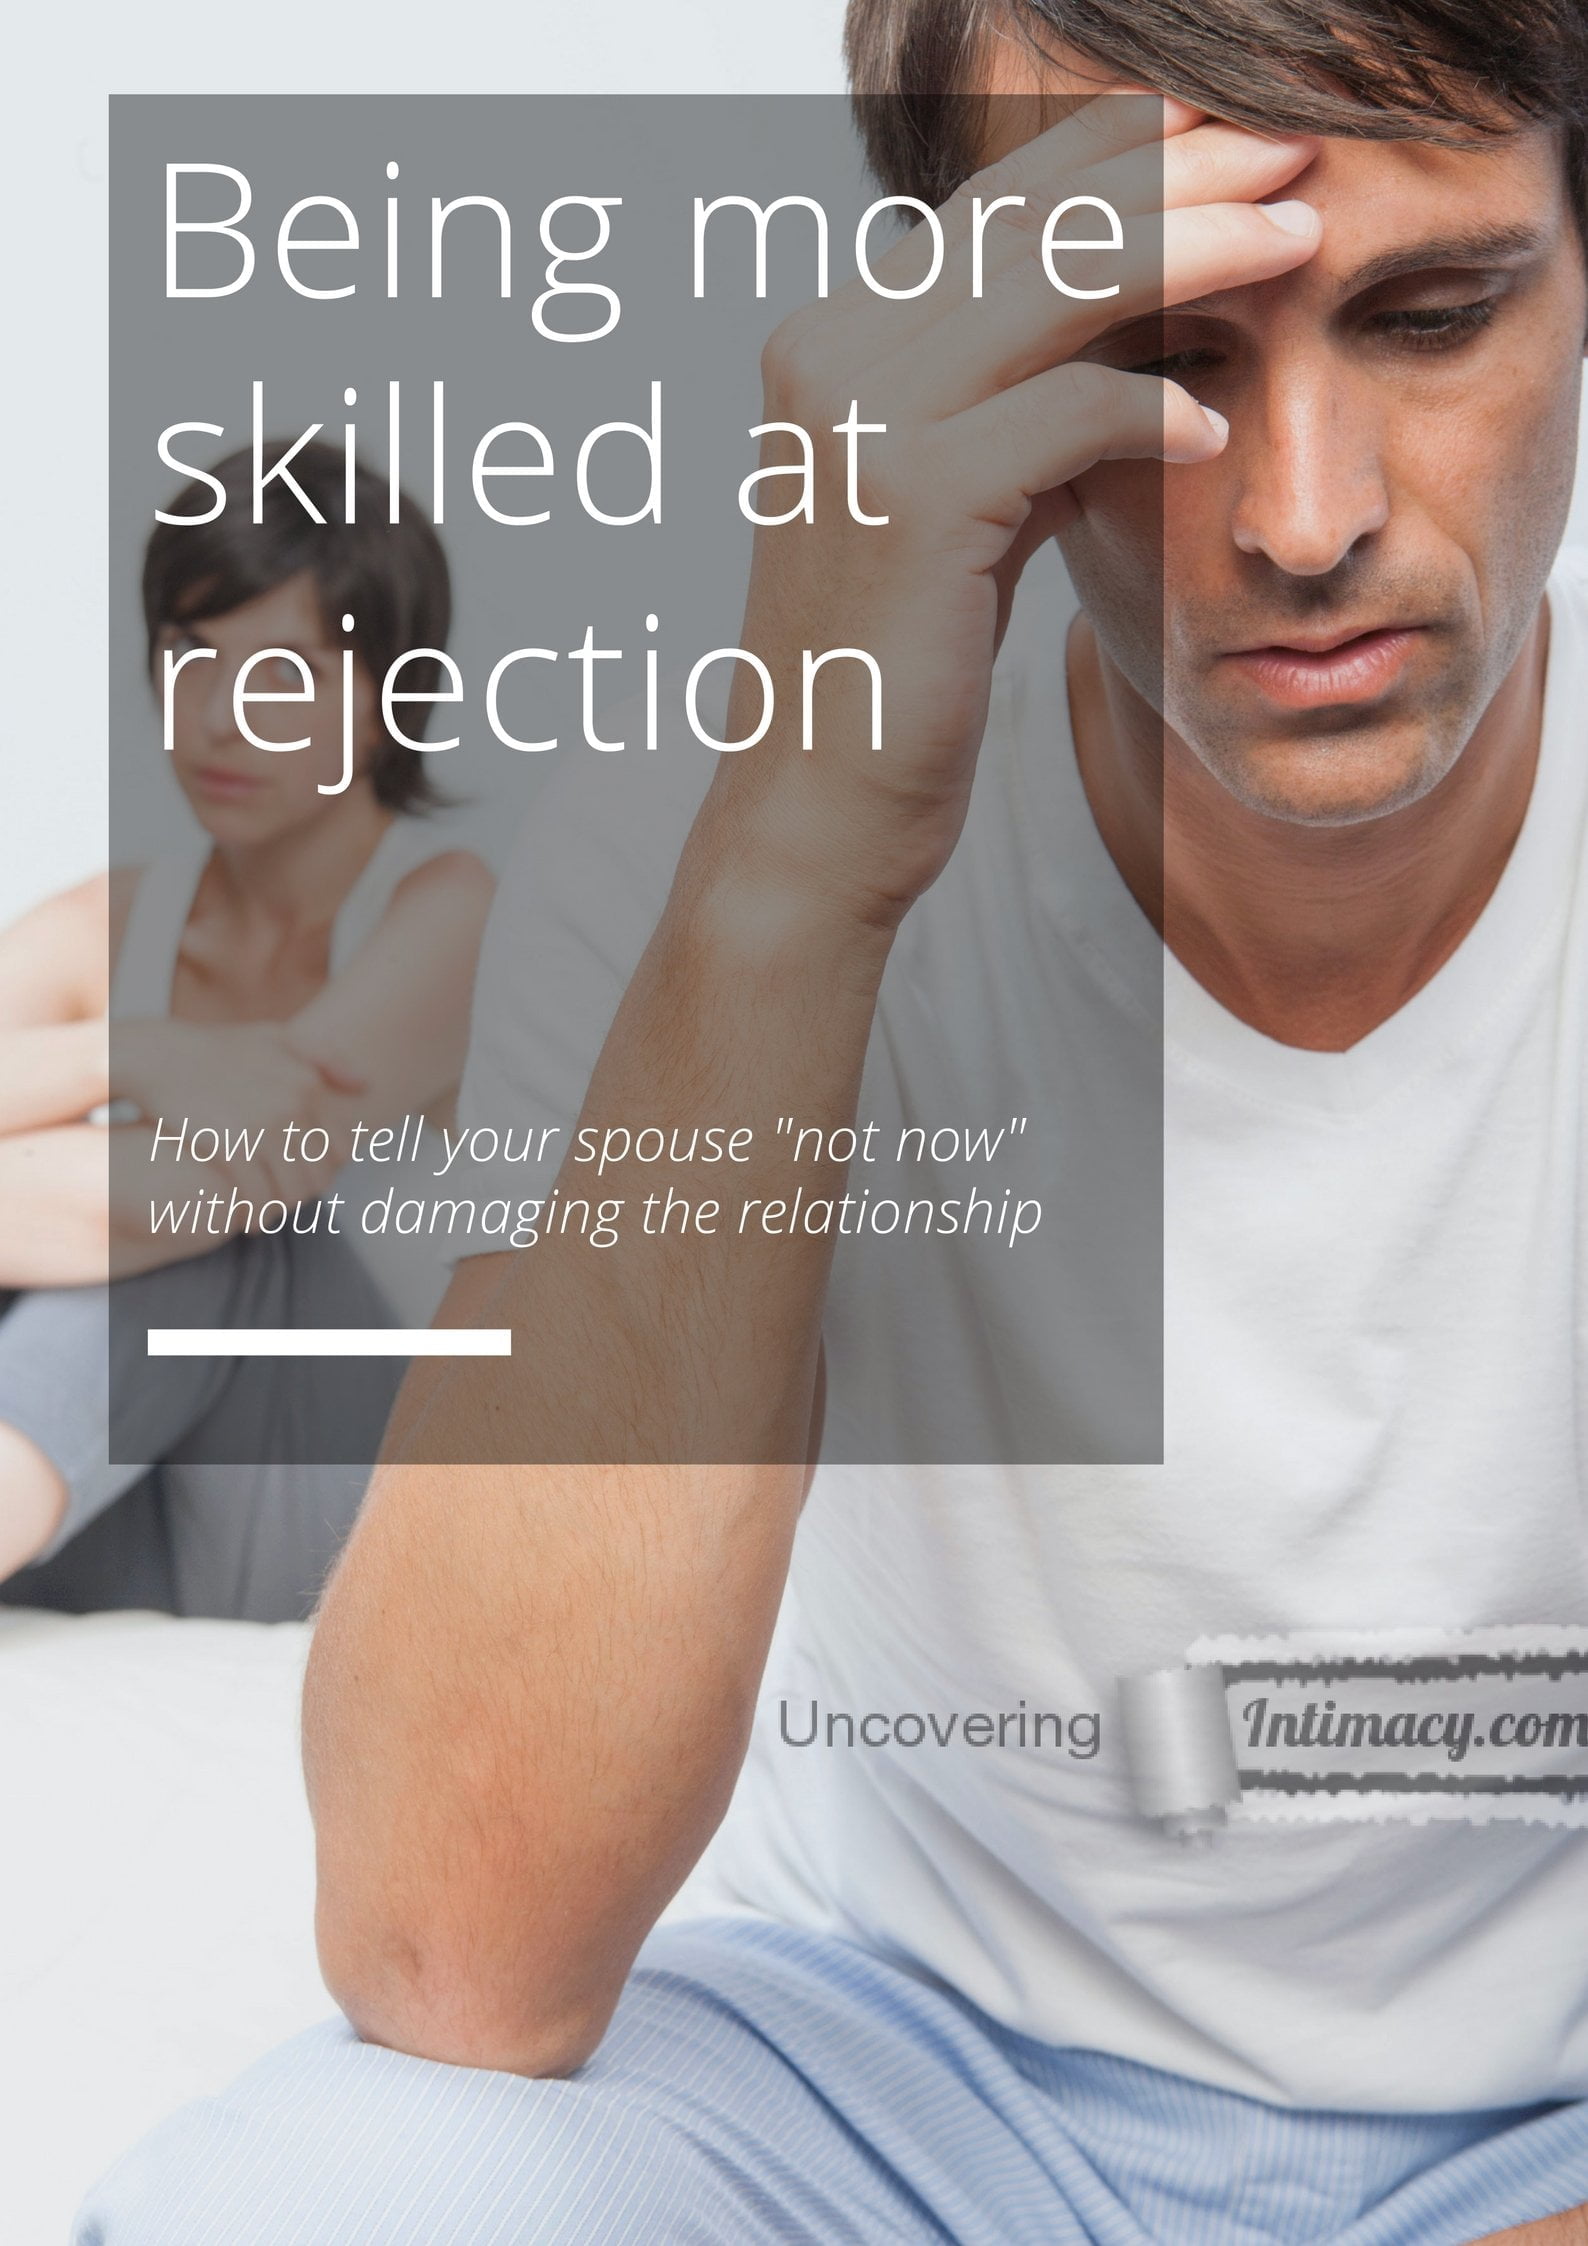 Being more skilled at rejection